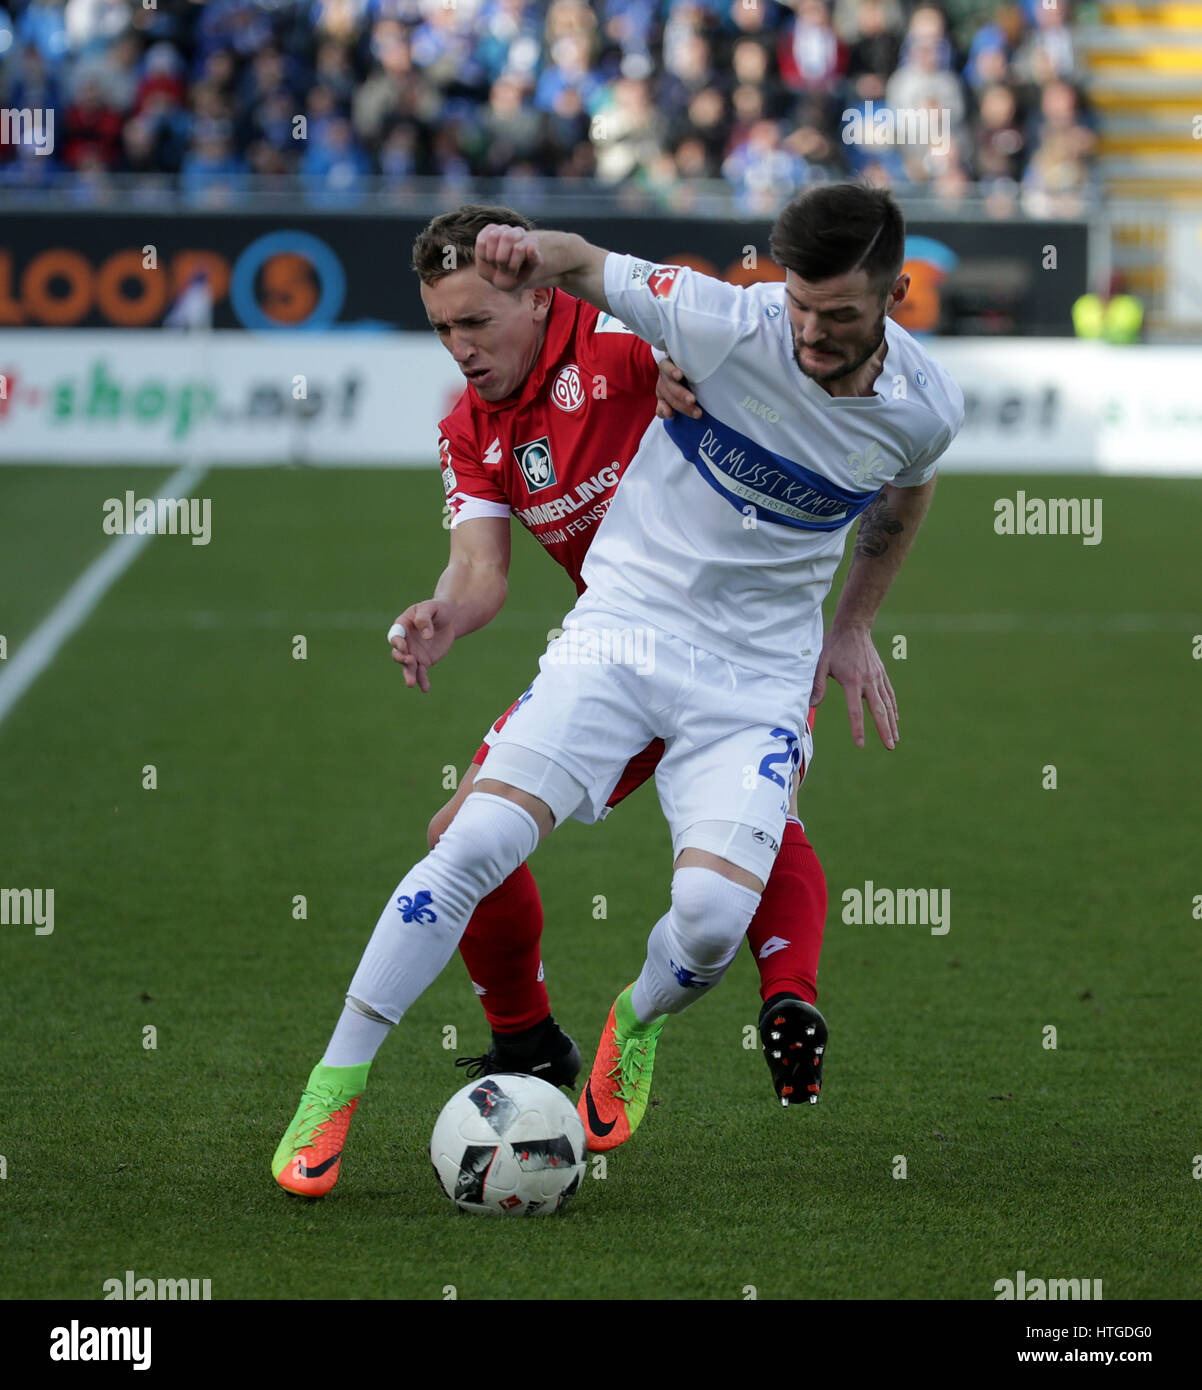 Darmstadt, Germany. 11th Mar, 2017. Darmstadt's Marcel Heller (R) and Mainz's Pablo De Blasis vie for the ball during the German Bundesliga soccer match between SV Darmstadt 98 and 1. FSV Mainz 05 in the Jonathan Heimes Stadium in Darmstadt, Germany, 11 March 2017.  Photo: Hasan Bratic/dpa/Alamy Live News Stock Photo